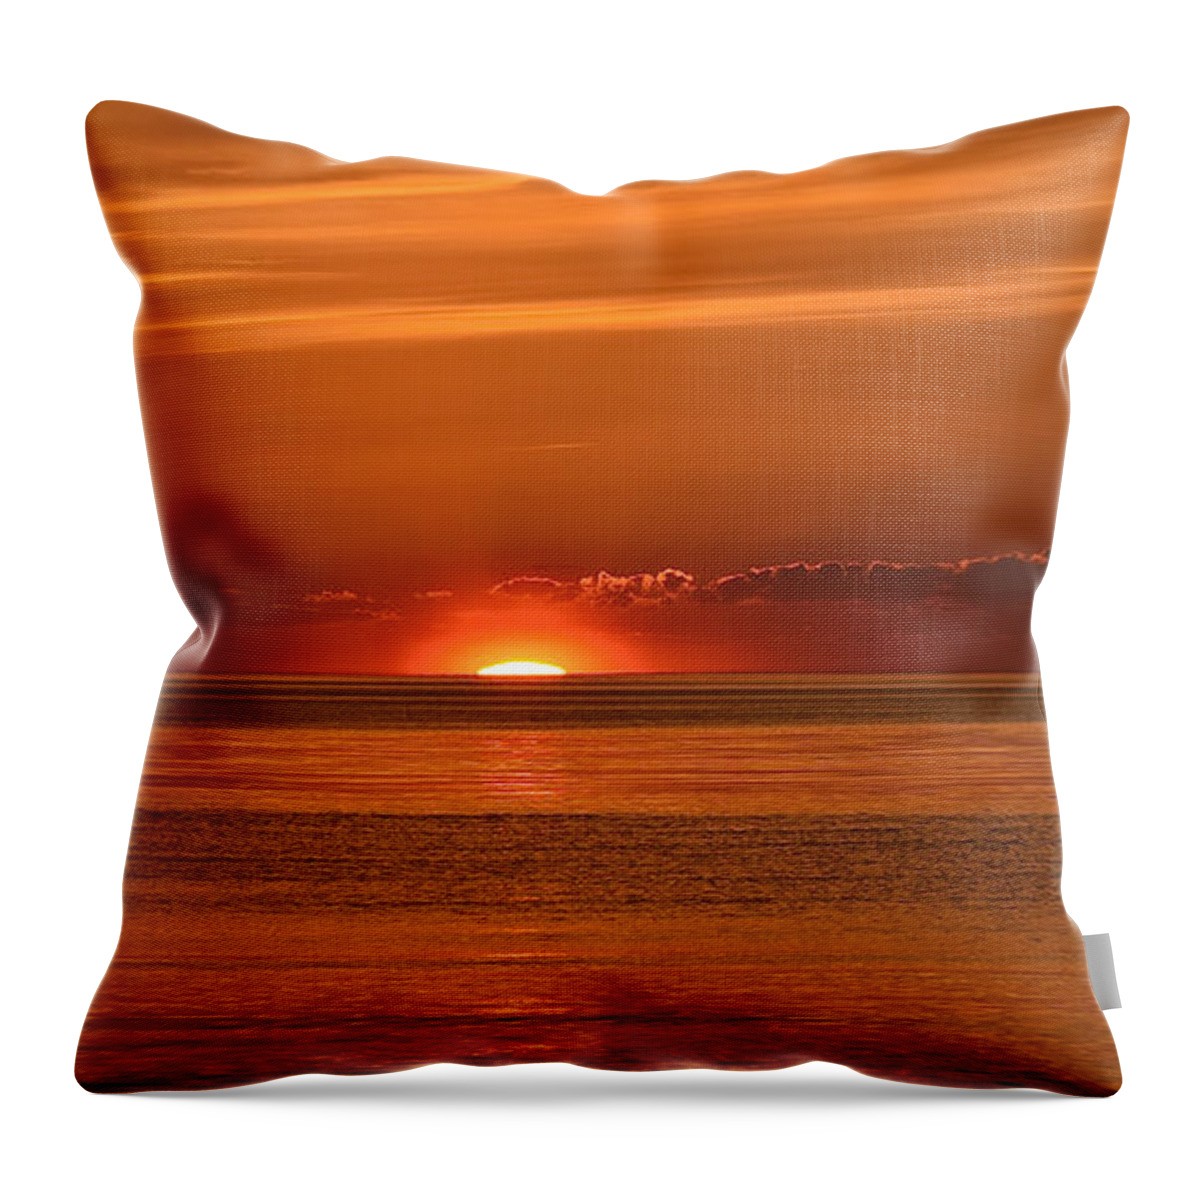 Halo Throw Pillow featuring the photograph Sunset Sun Halo - Skaket Beach by Debra Banks